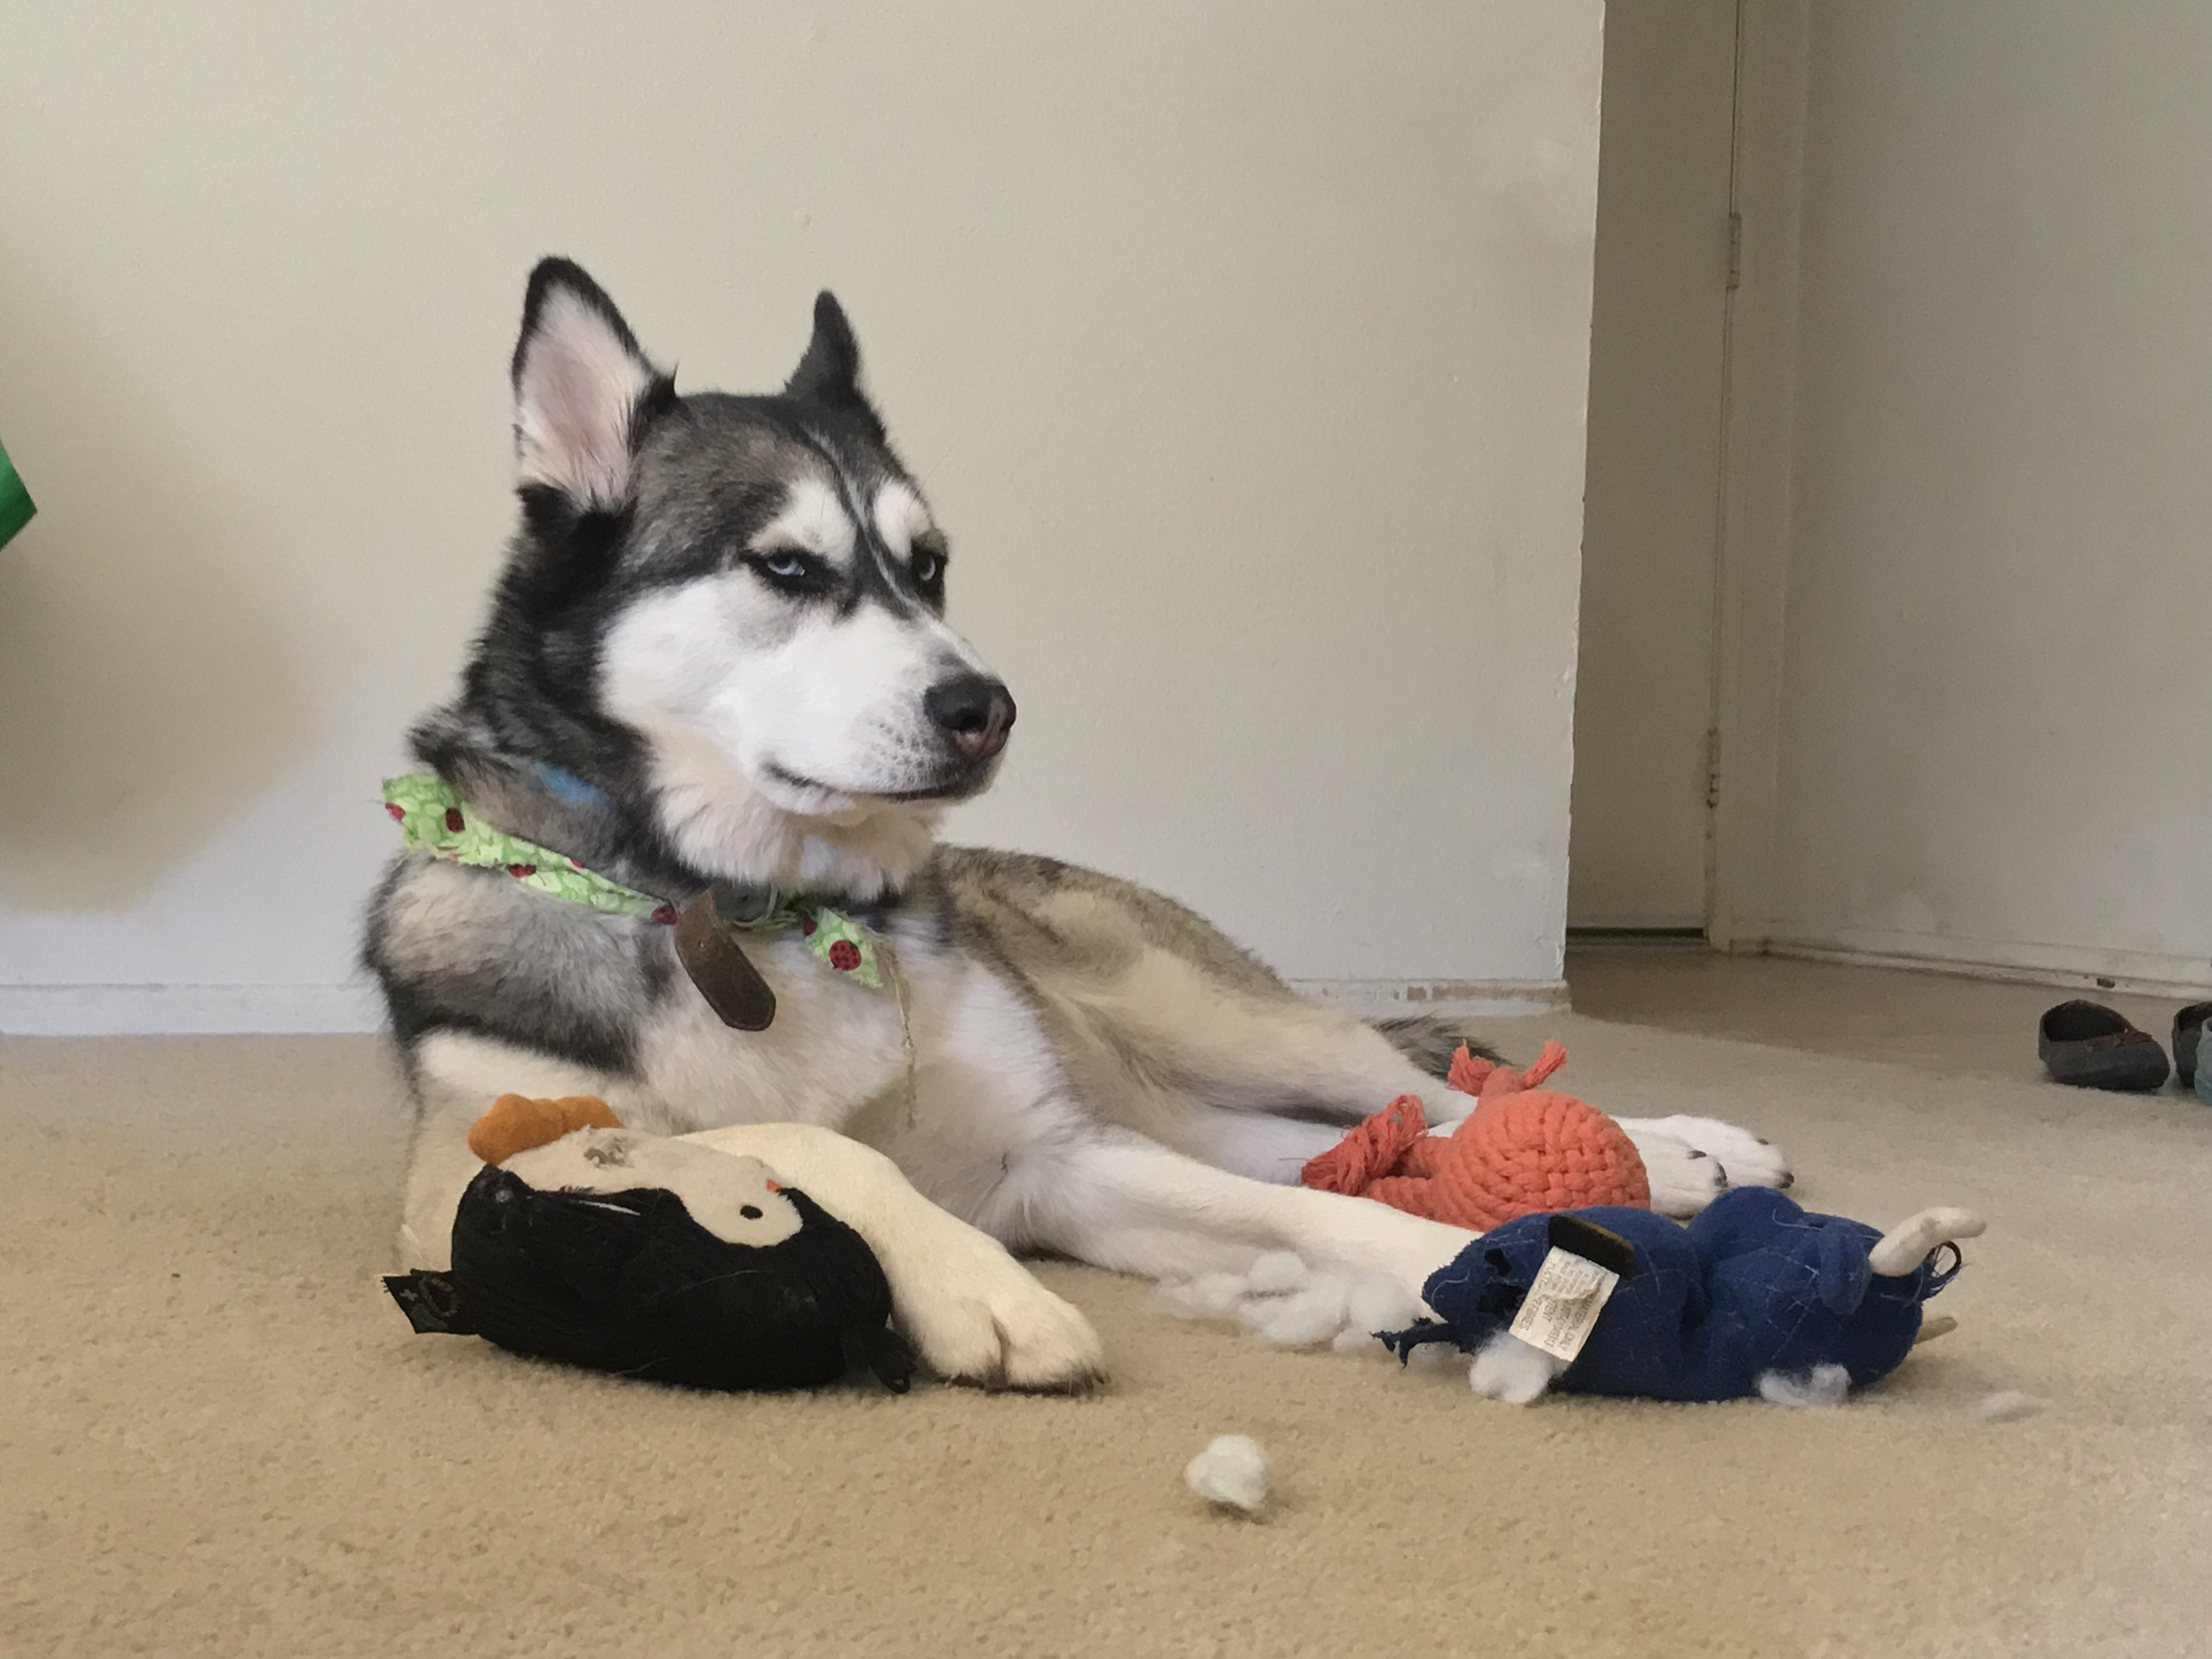 A black and white husky surrounded by stuffed animals with some of the stuffing ripped out.